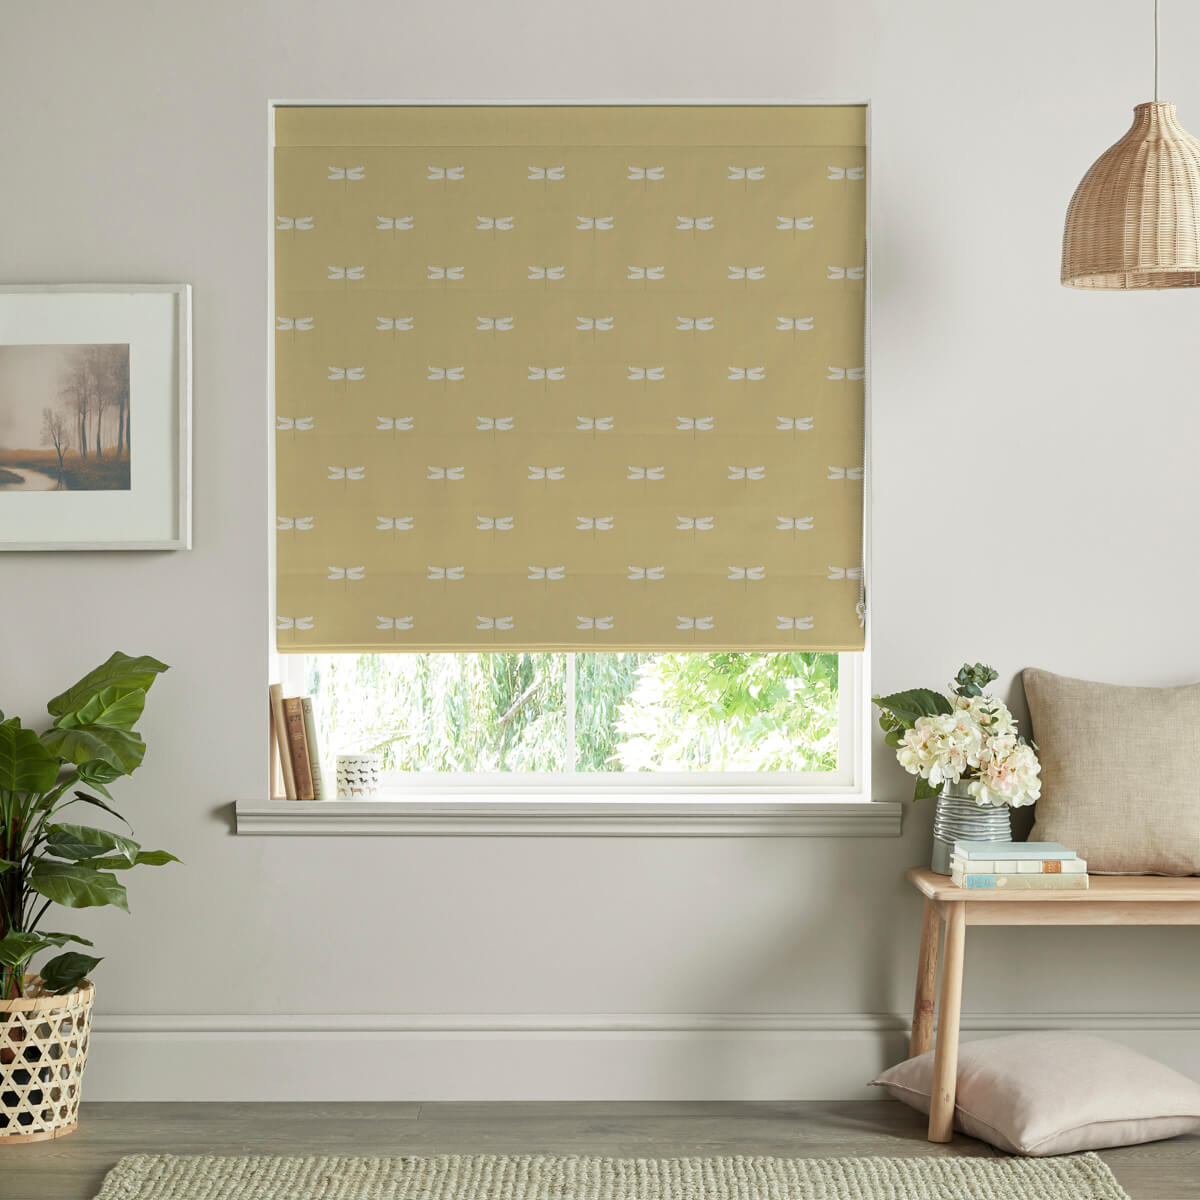 Learn How To Measure Blinds With Our Helpful Guide